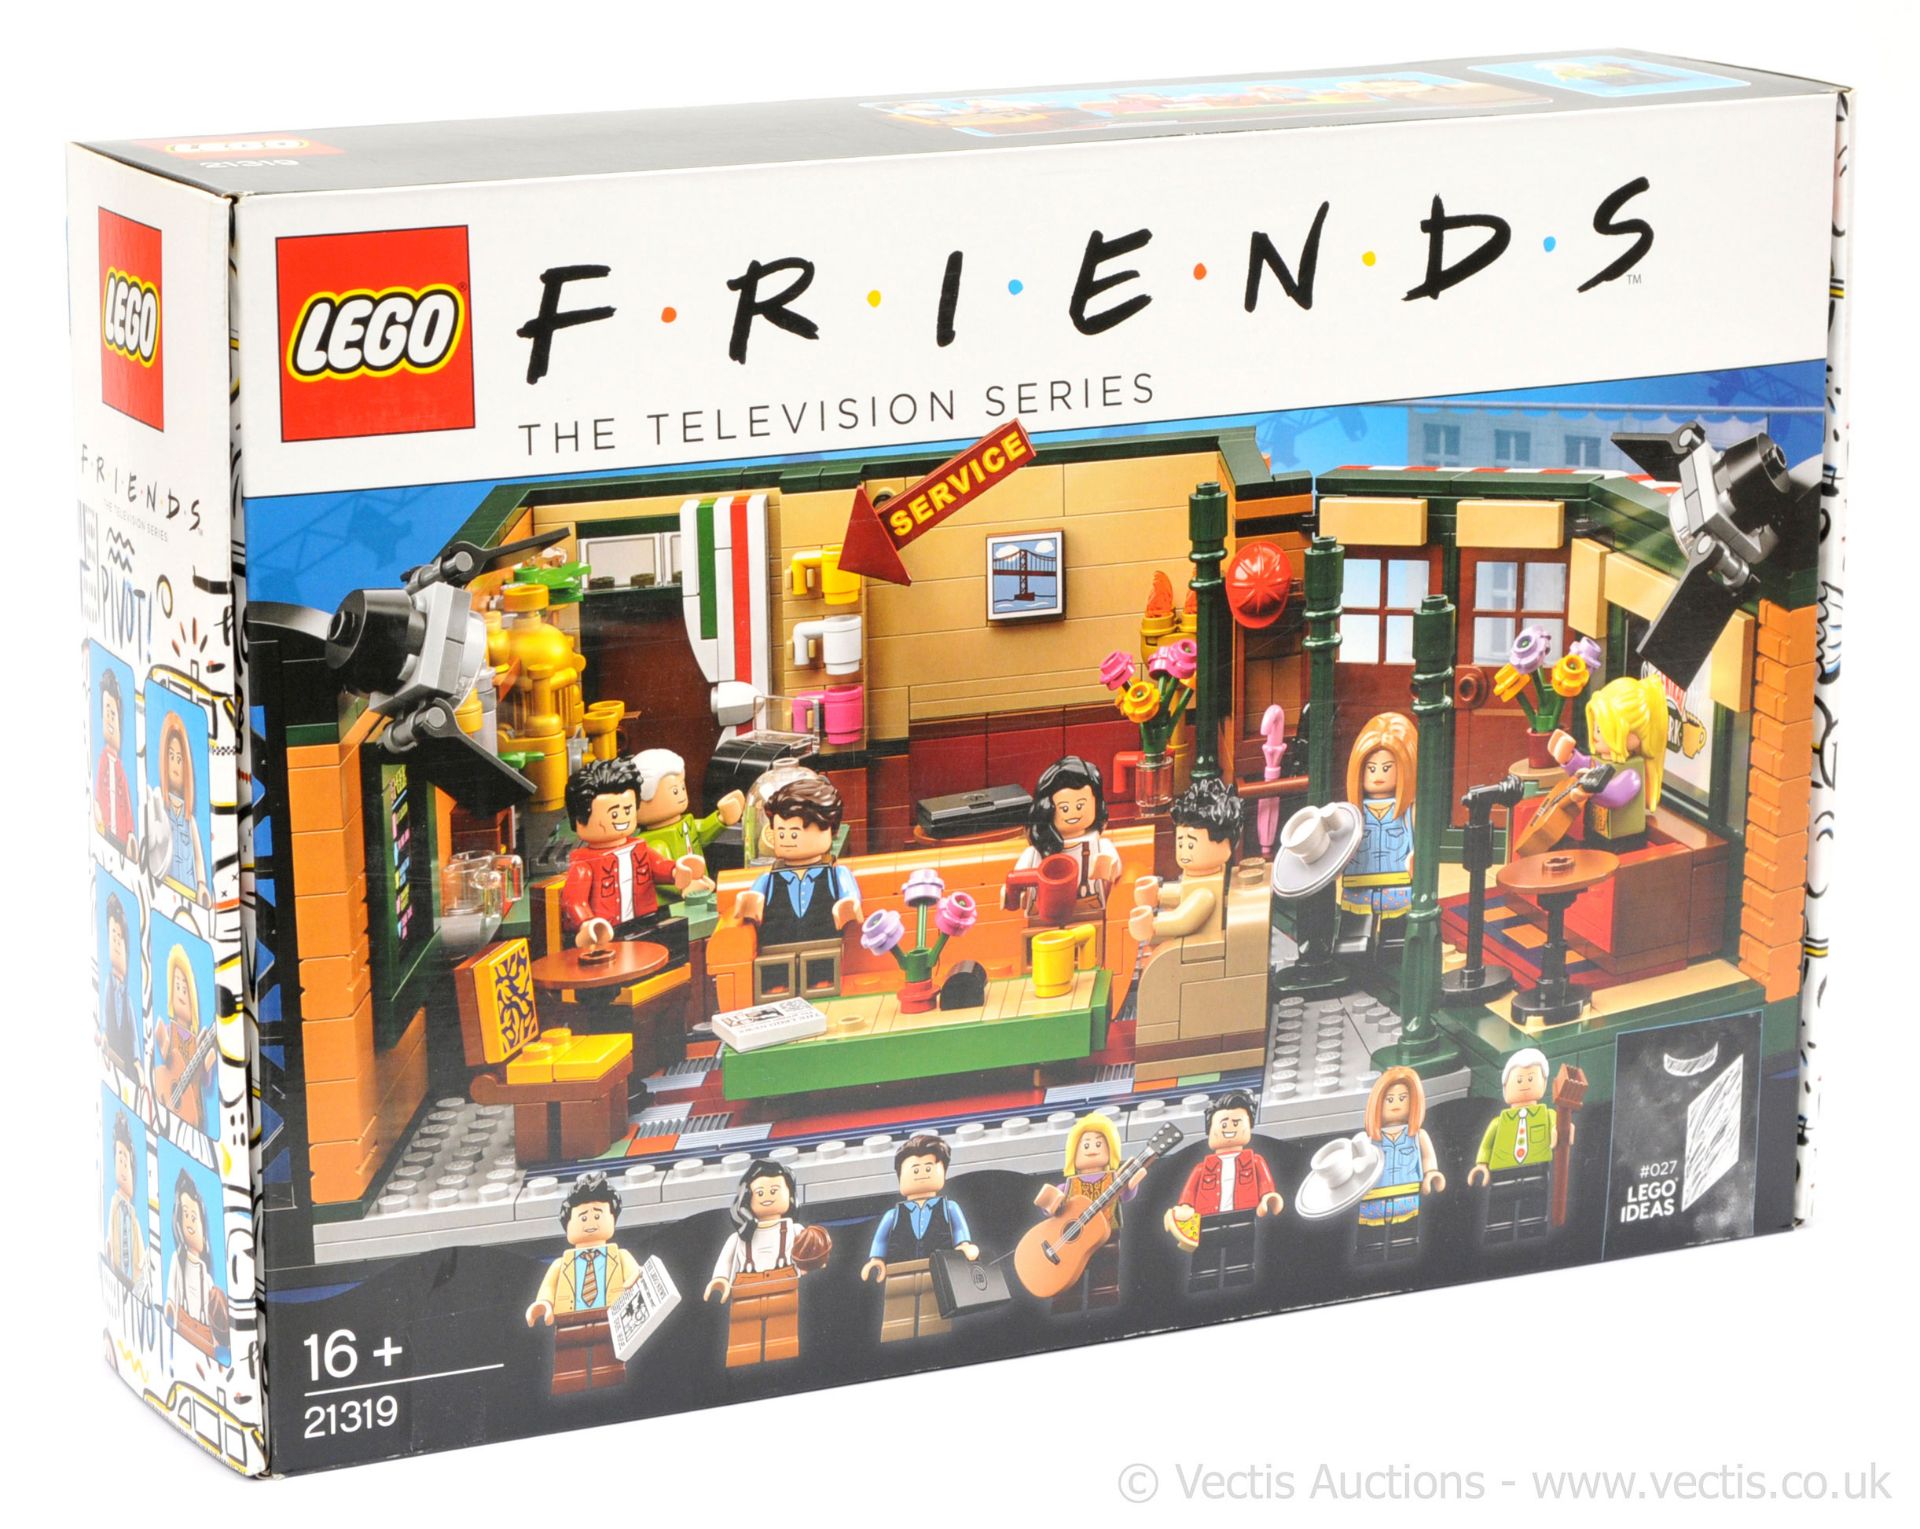 Lego Friends TV series set number 21319, within